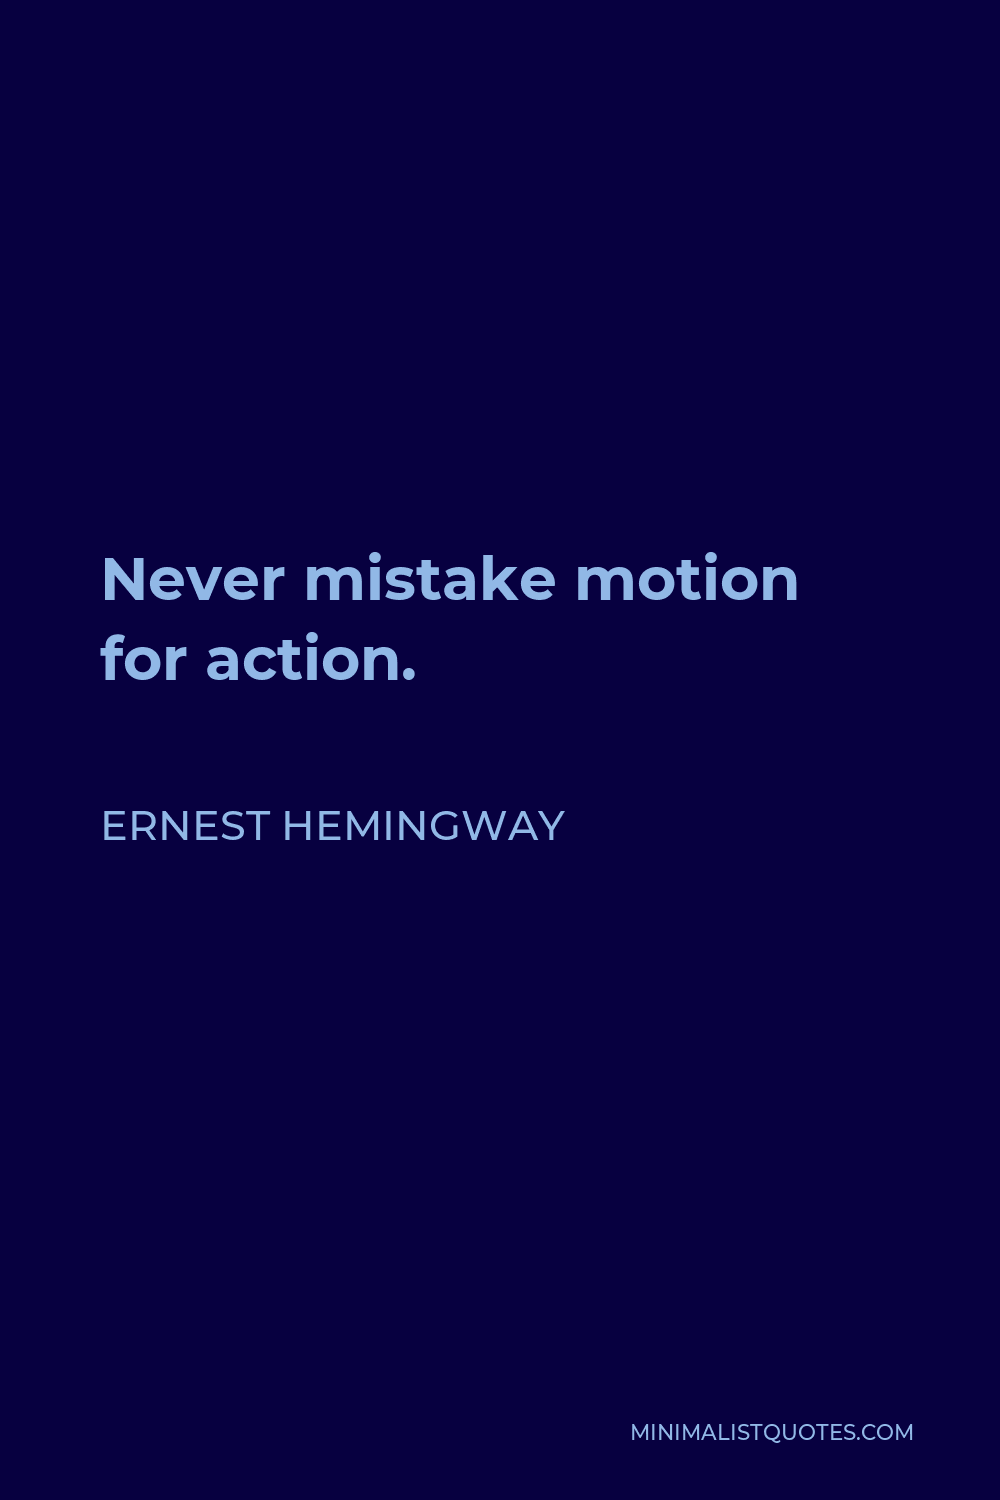 Ernest Hemingway Quote - Never mistake motion for action.